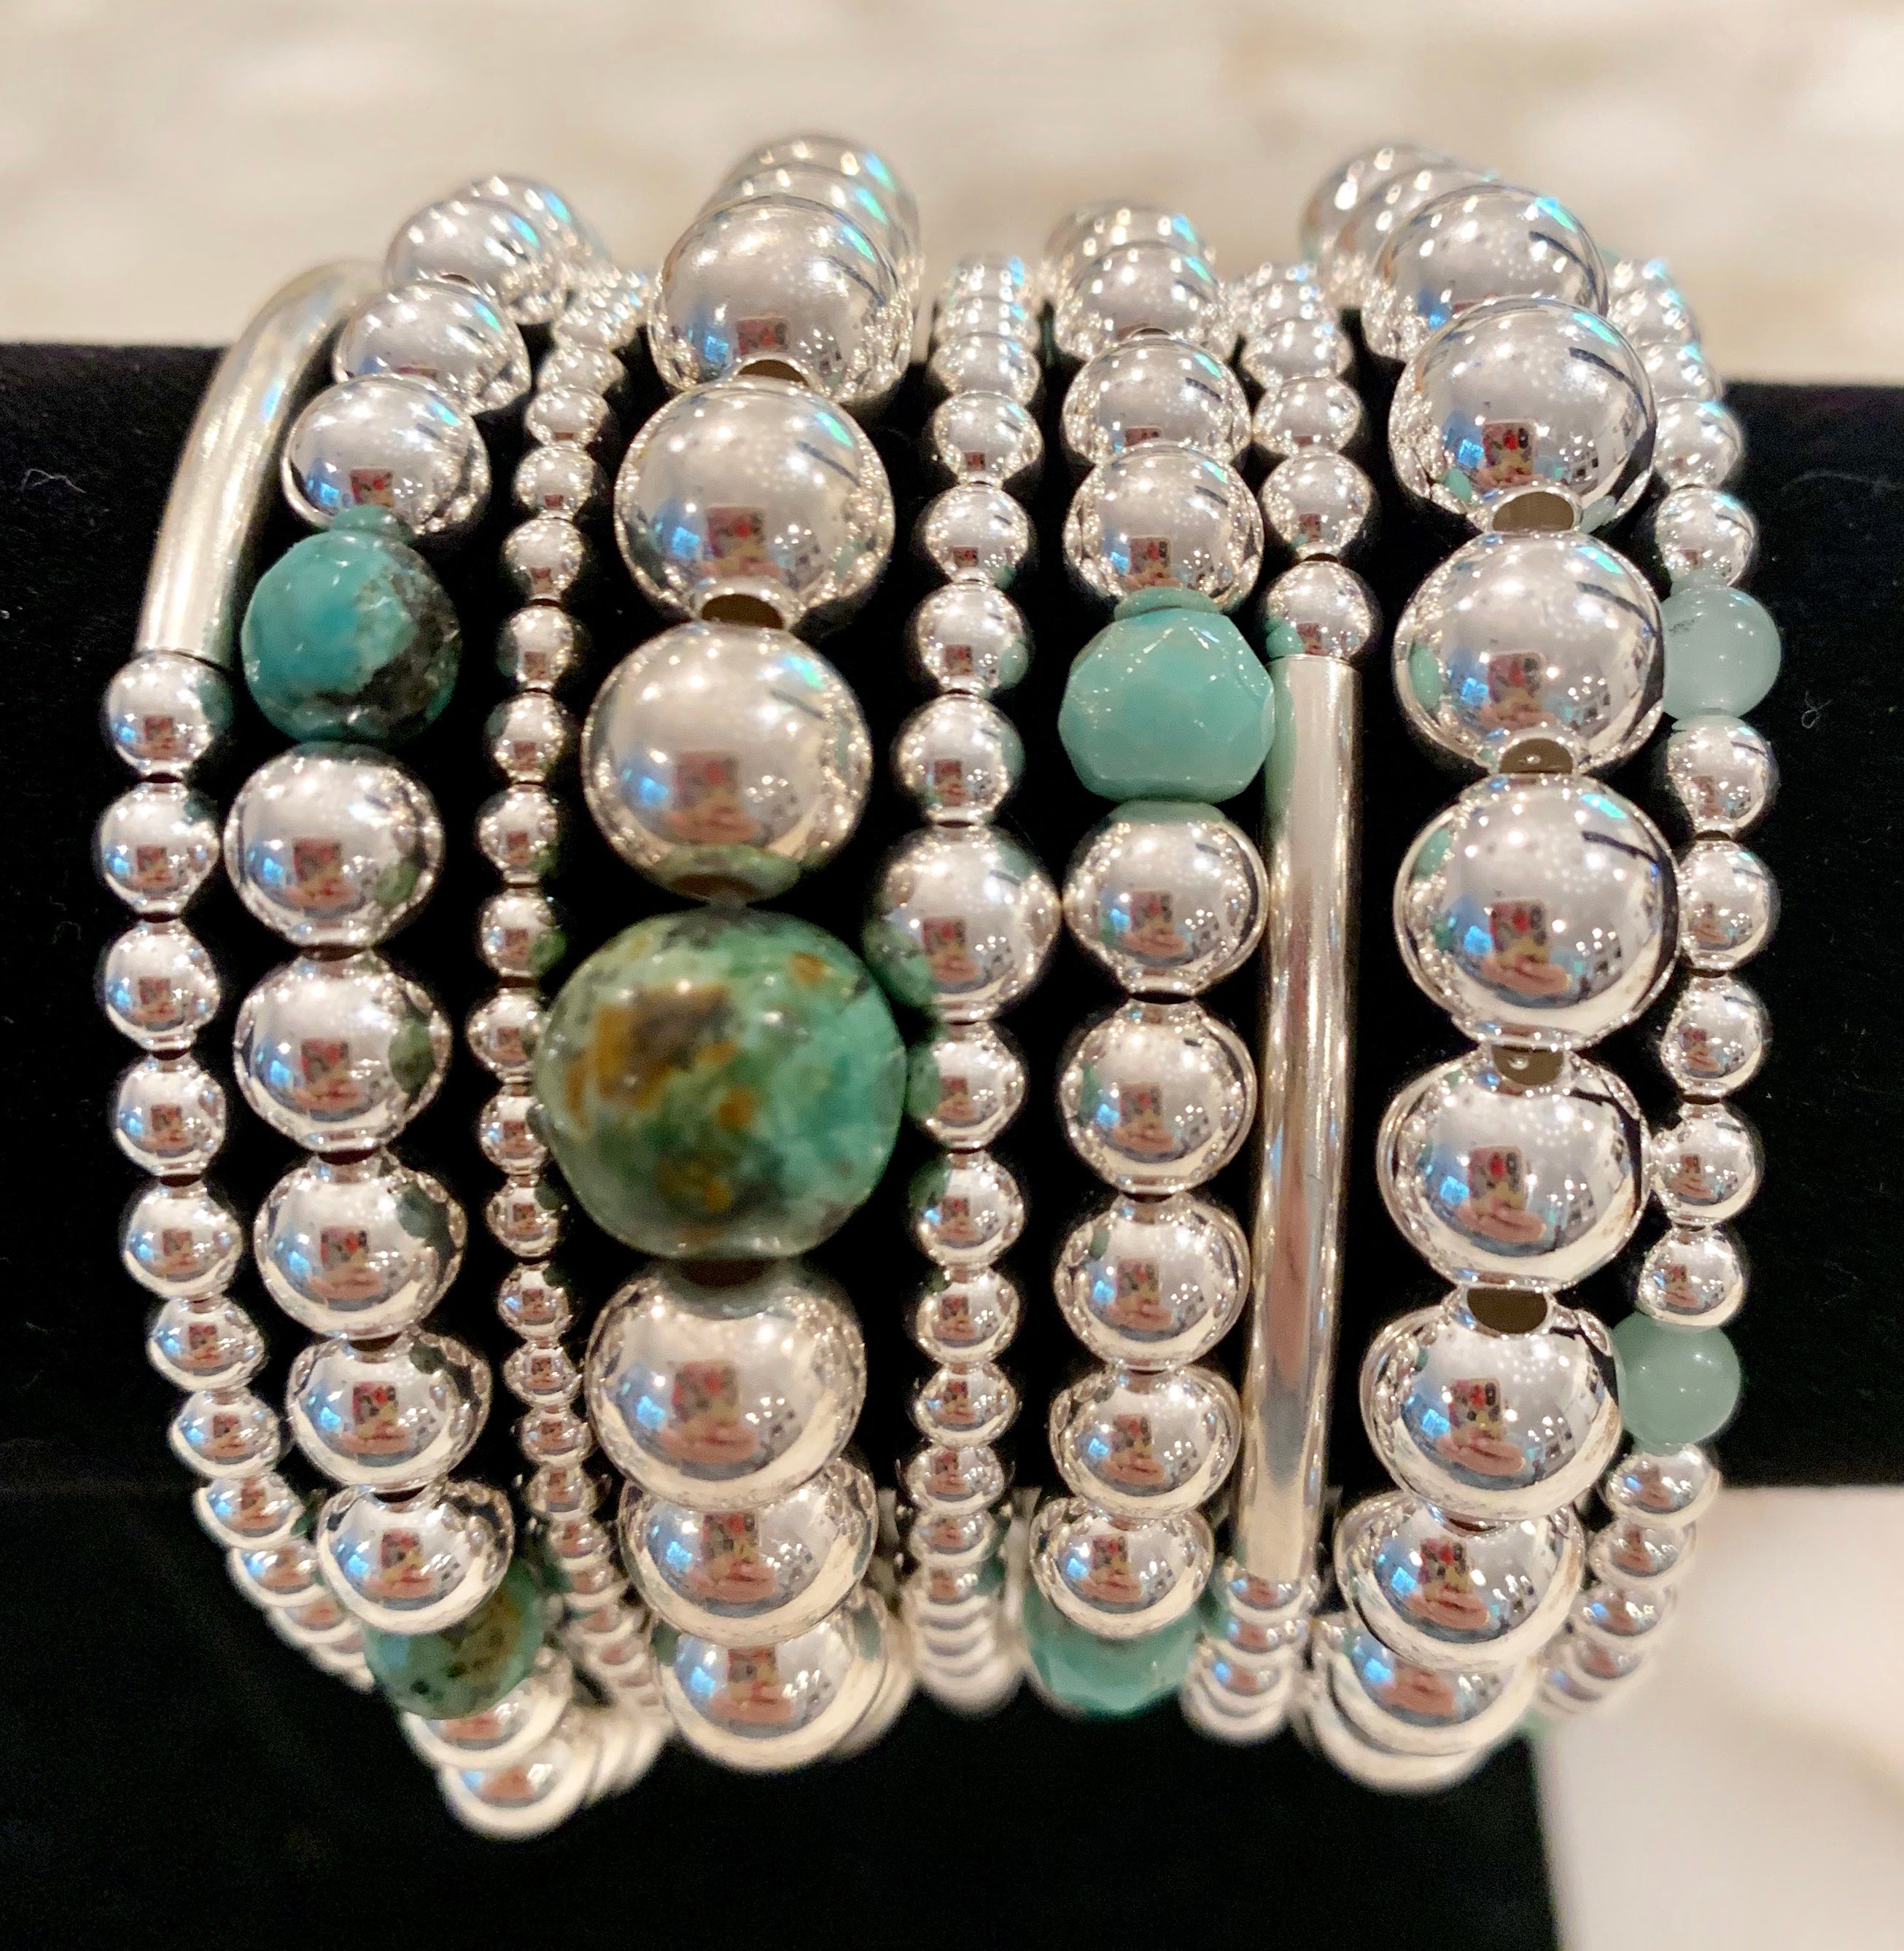 BETH 9 Piece Sterling Silver Bead Bracelet Stack with Africa Turquoise, Green Opal and Pale Green Jade